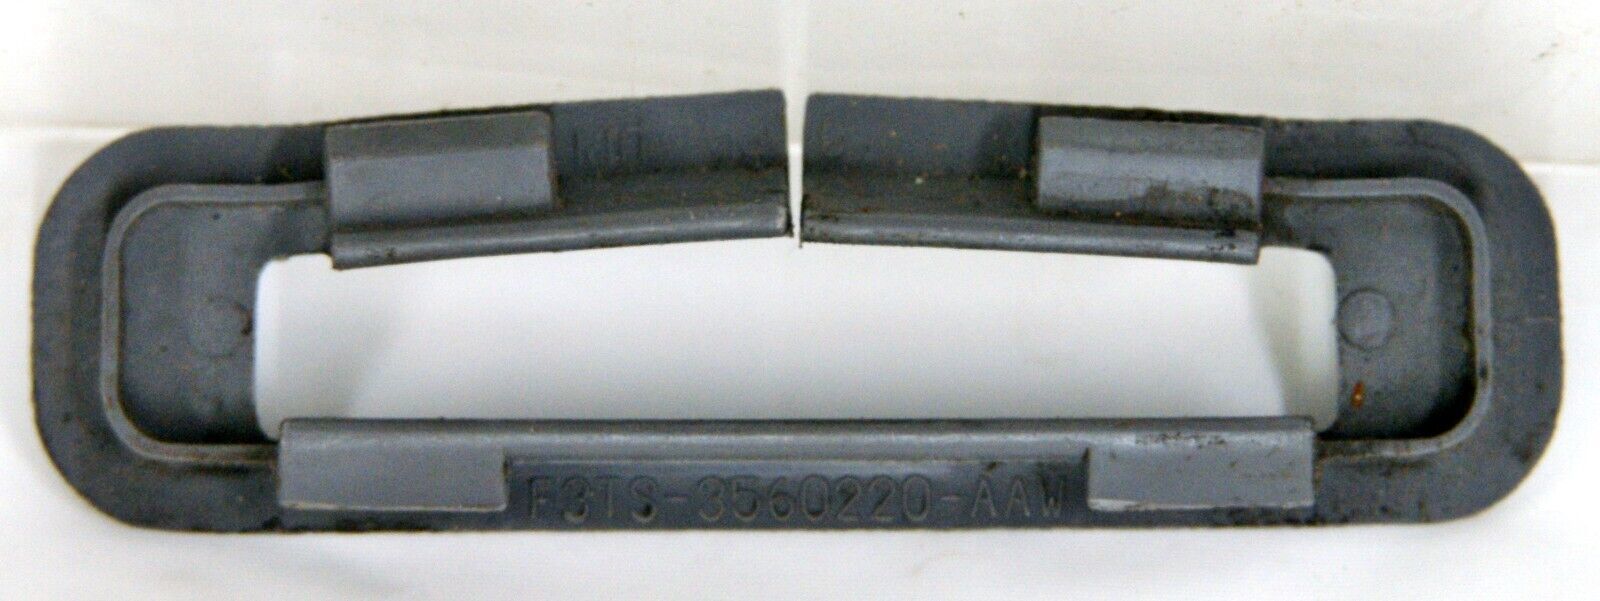 1992-1997 Ford F5TS-3560220-AAW Seat Belt Guide Gray OEM 7705 - $4.94